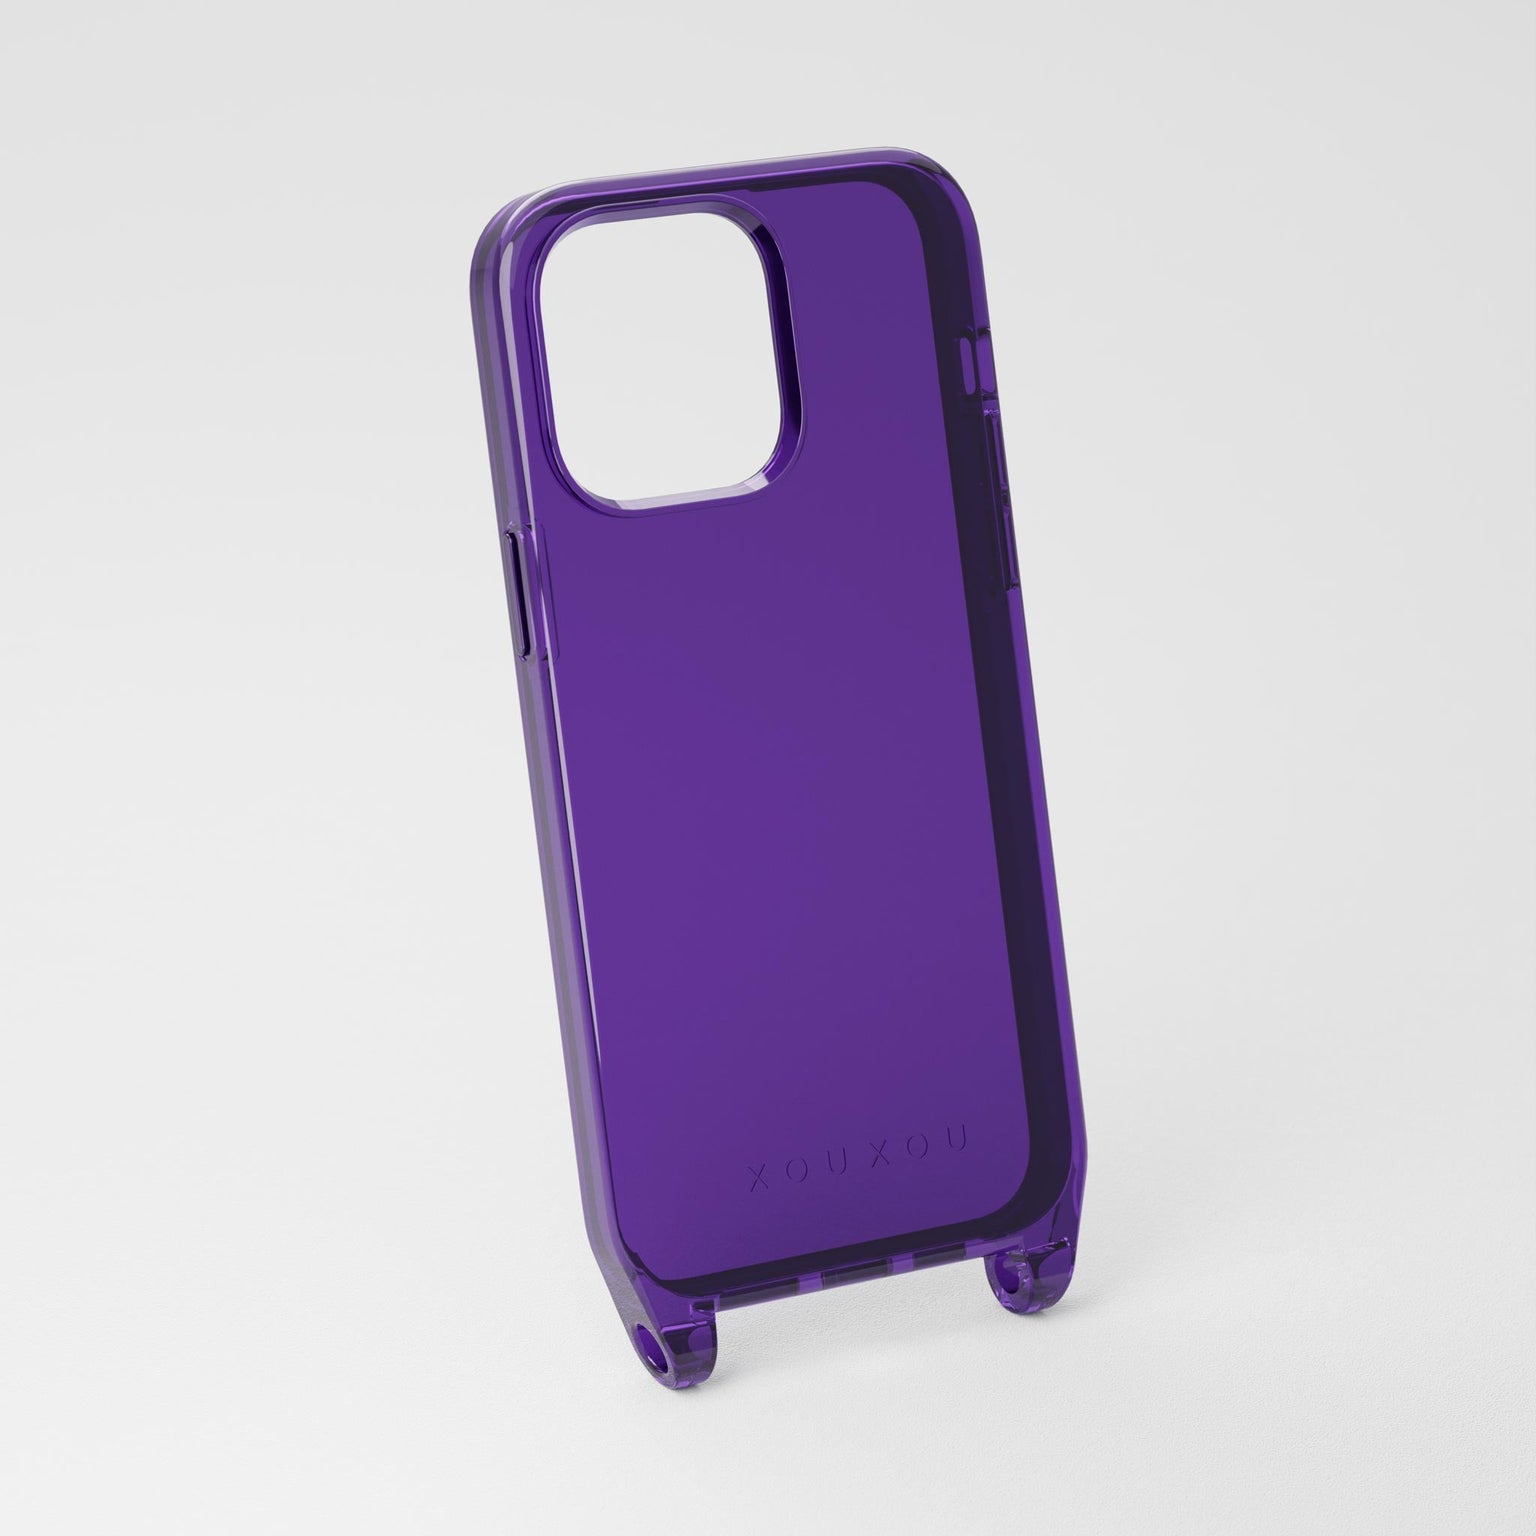 Shine through Purple colored iPhone 14 Case for Phone Straps | XOUXOU